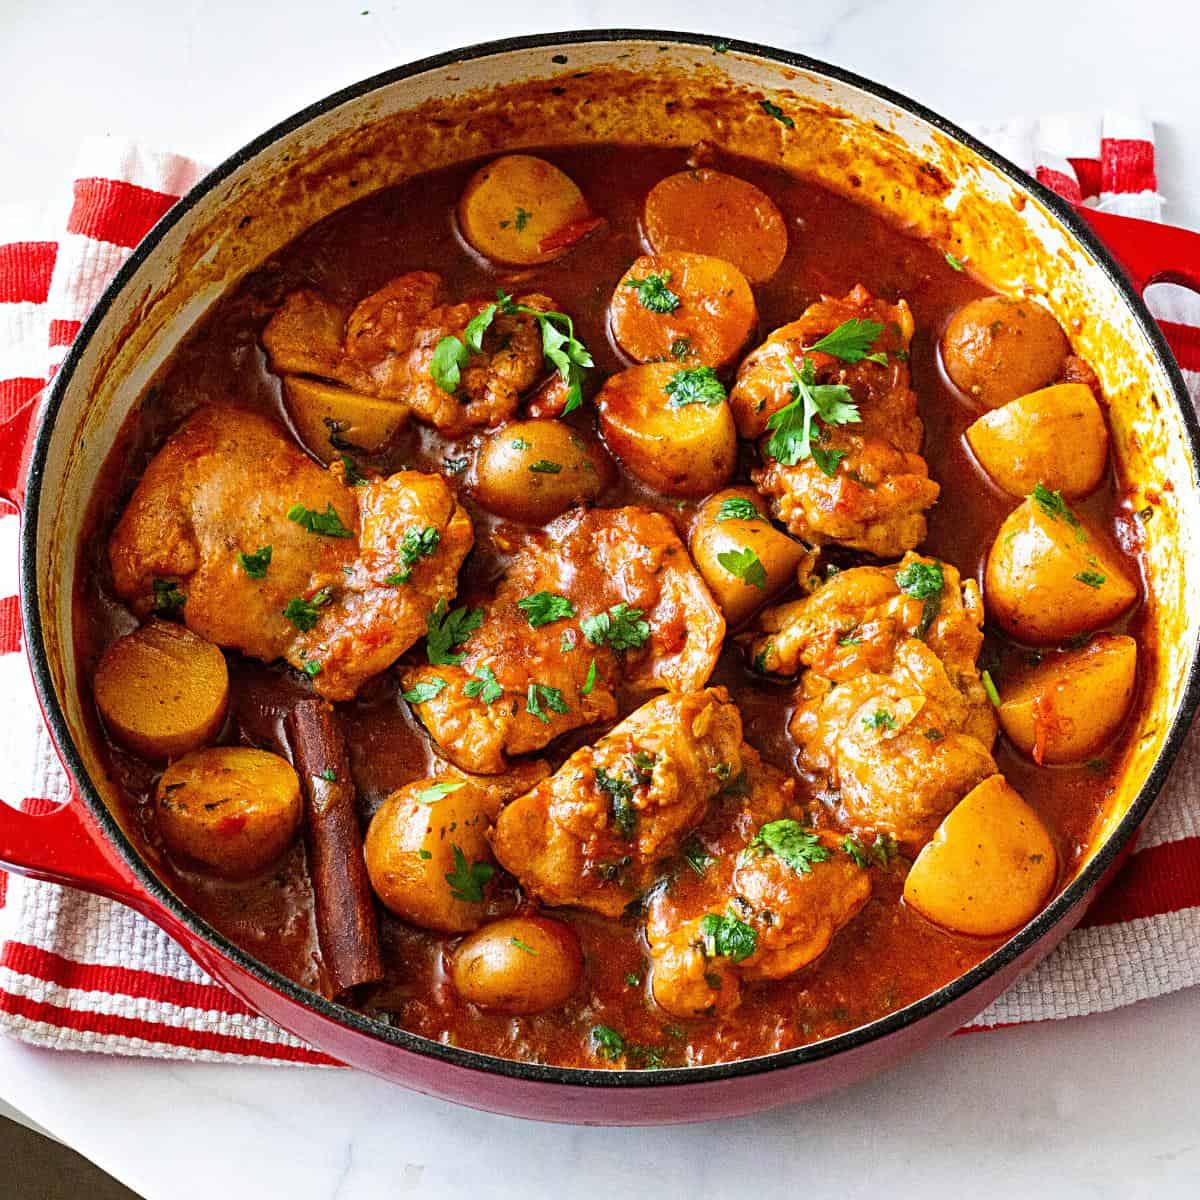 Dutch oven with braised chicken casserole with potatoes.